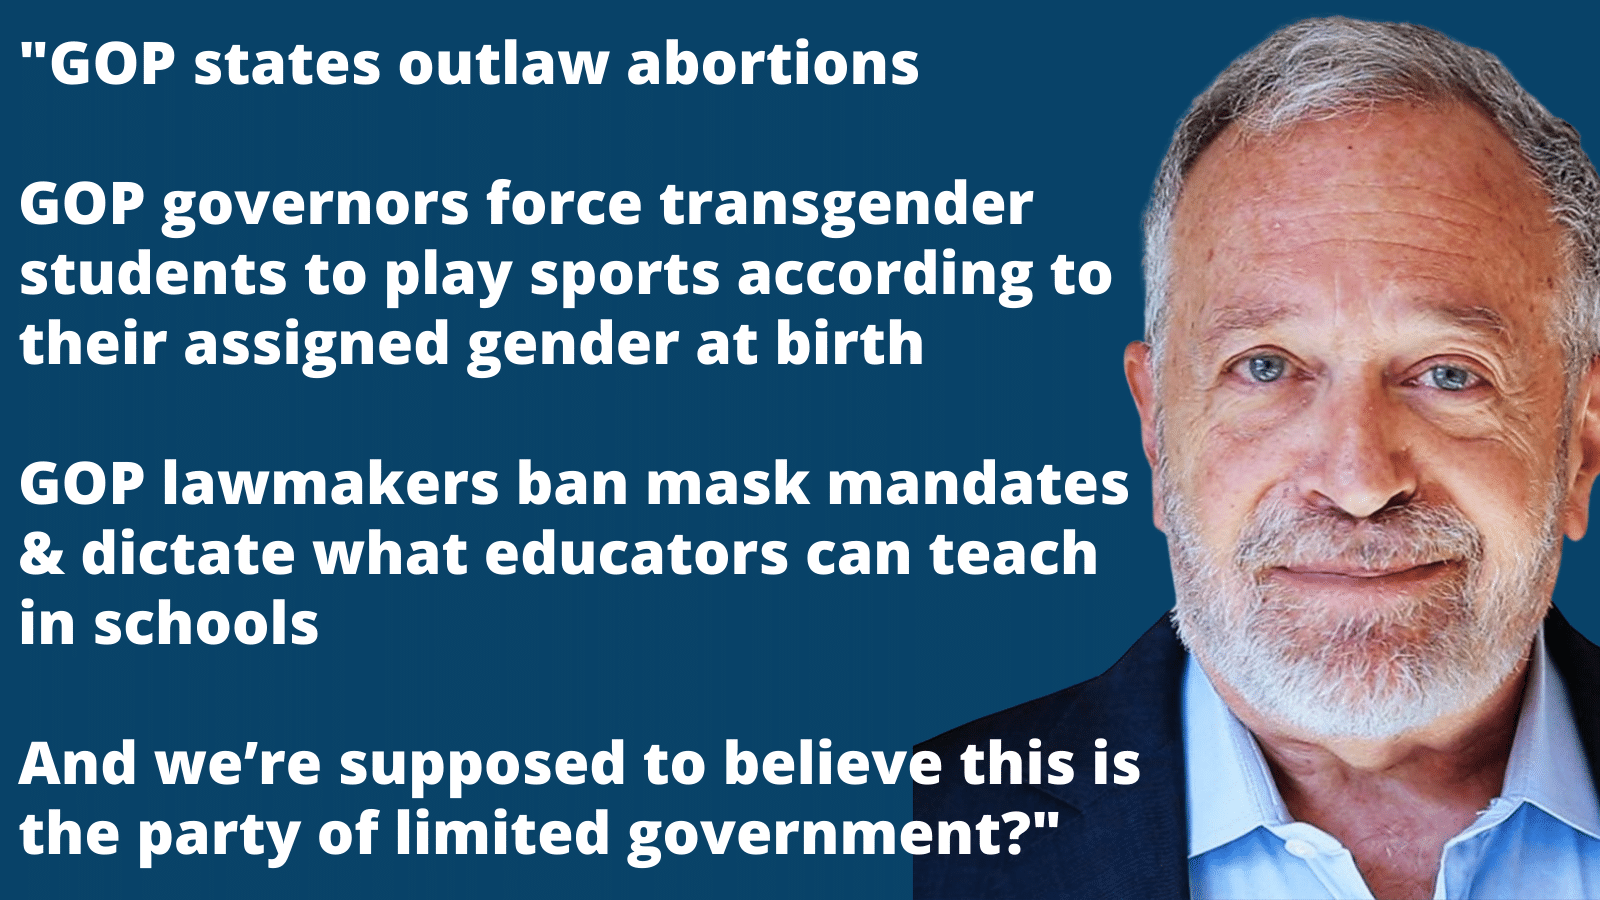 Robert Reich: ''GOP states outlaw abortions   GOP governors force transgender students to play sports according to their assigned gender at birth   GOP lawmakers ban mask mandates & dictate what educators can teach in schools   And we’re supposed to believe this is the party of limited government?''